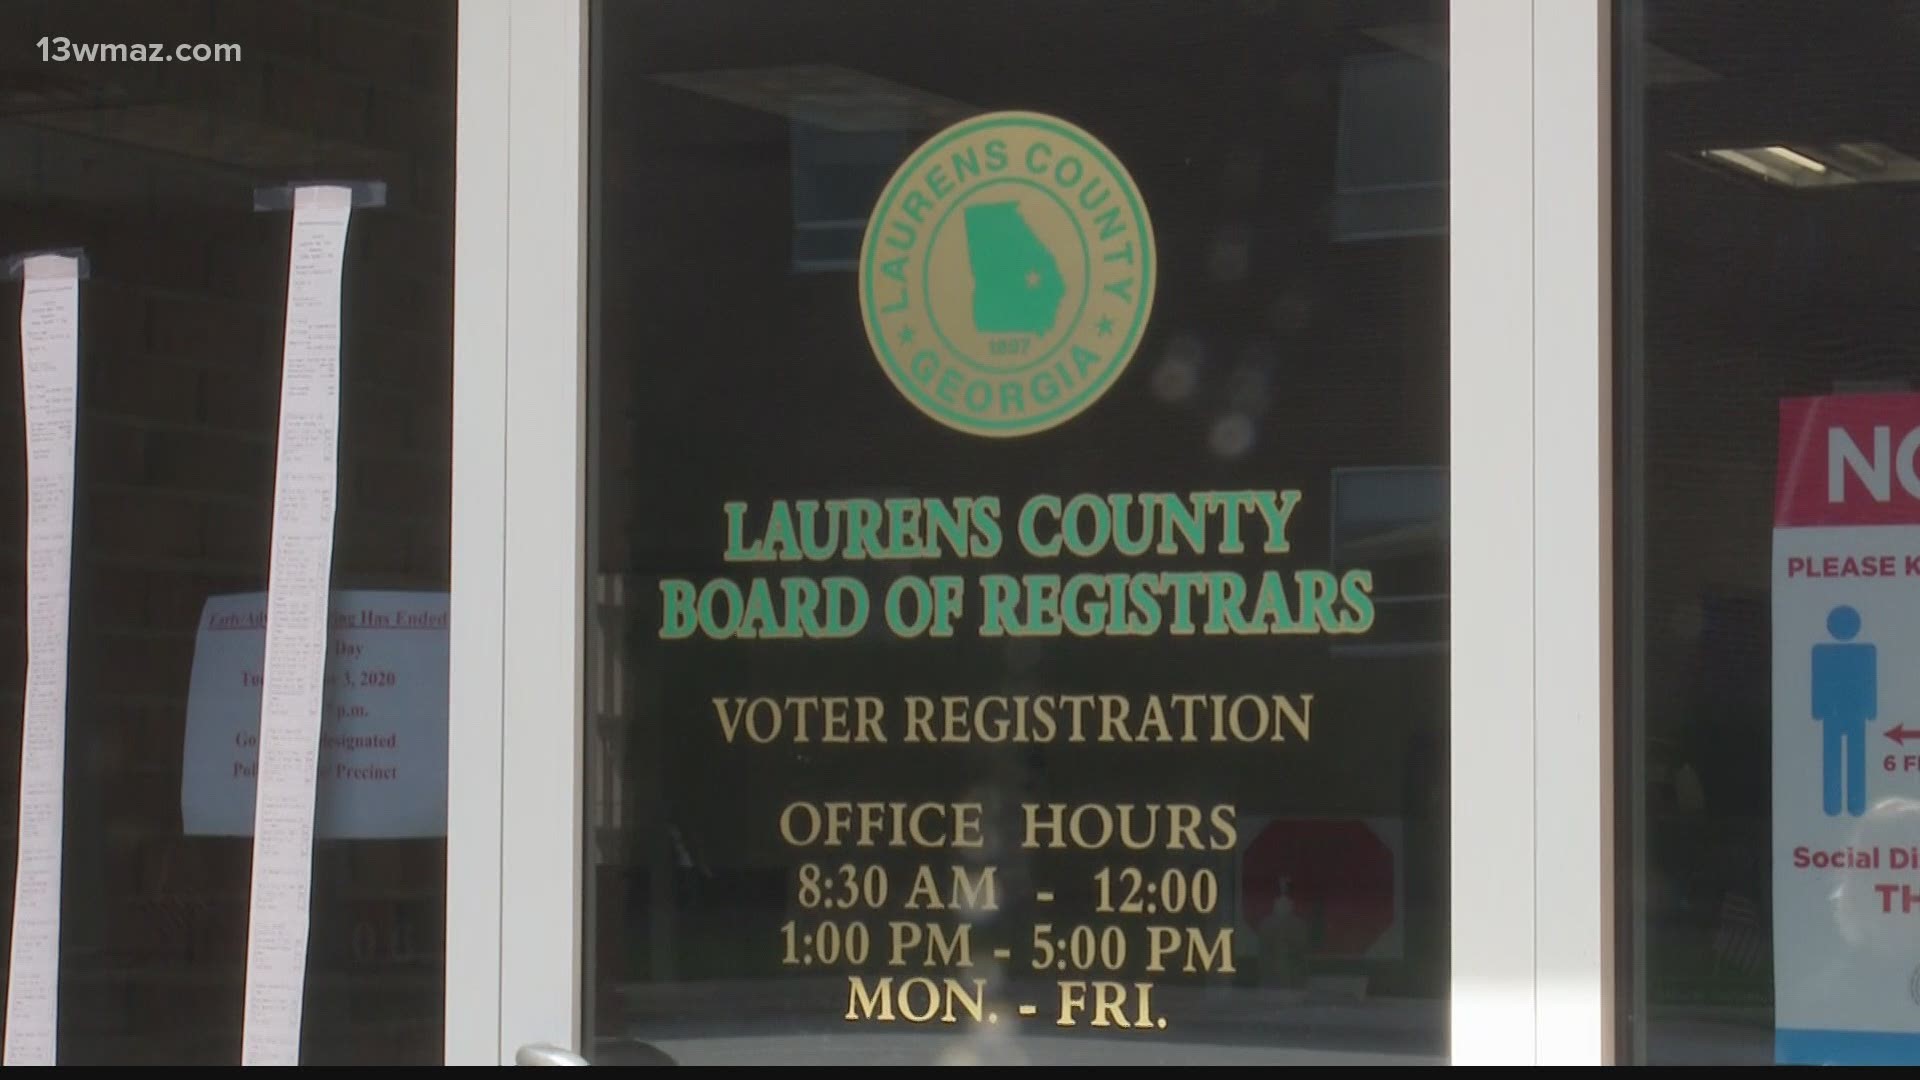 On Friday morning, the Secretary of State made a post on Facebook saying Laurens County had more than 1,700 absentee ballots that needed to be counted.